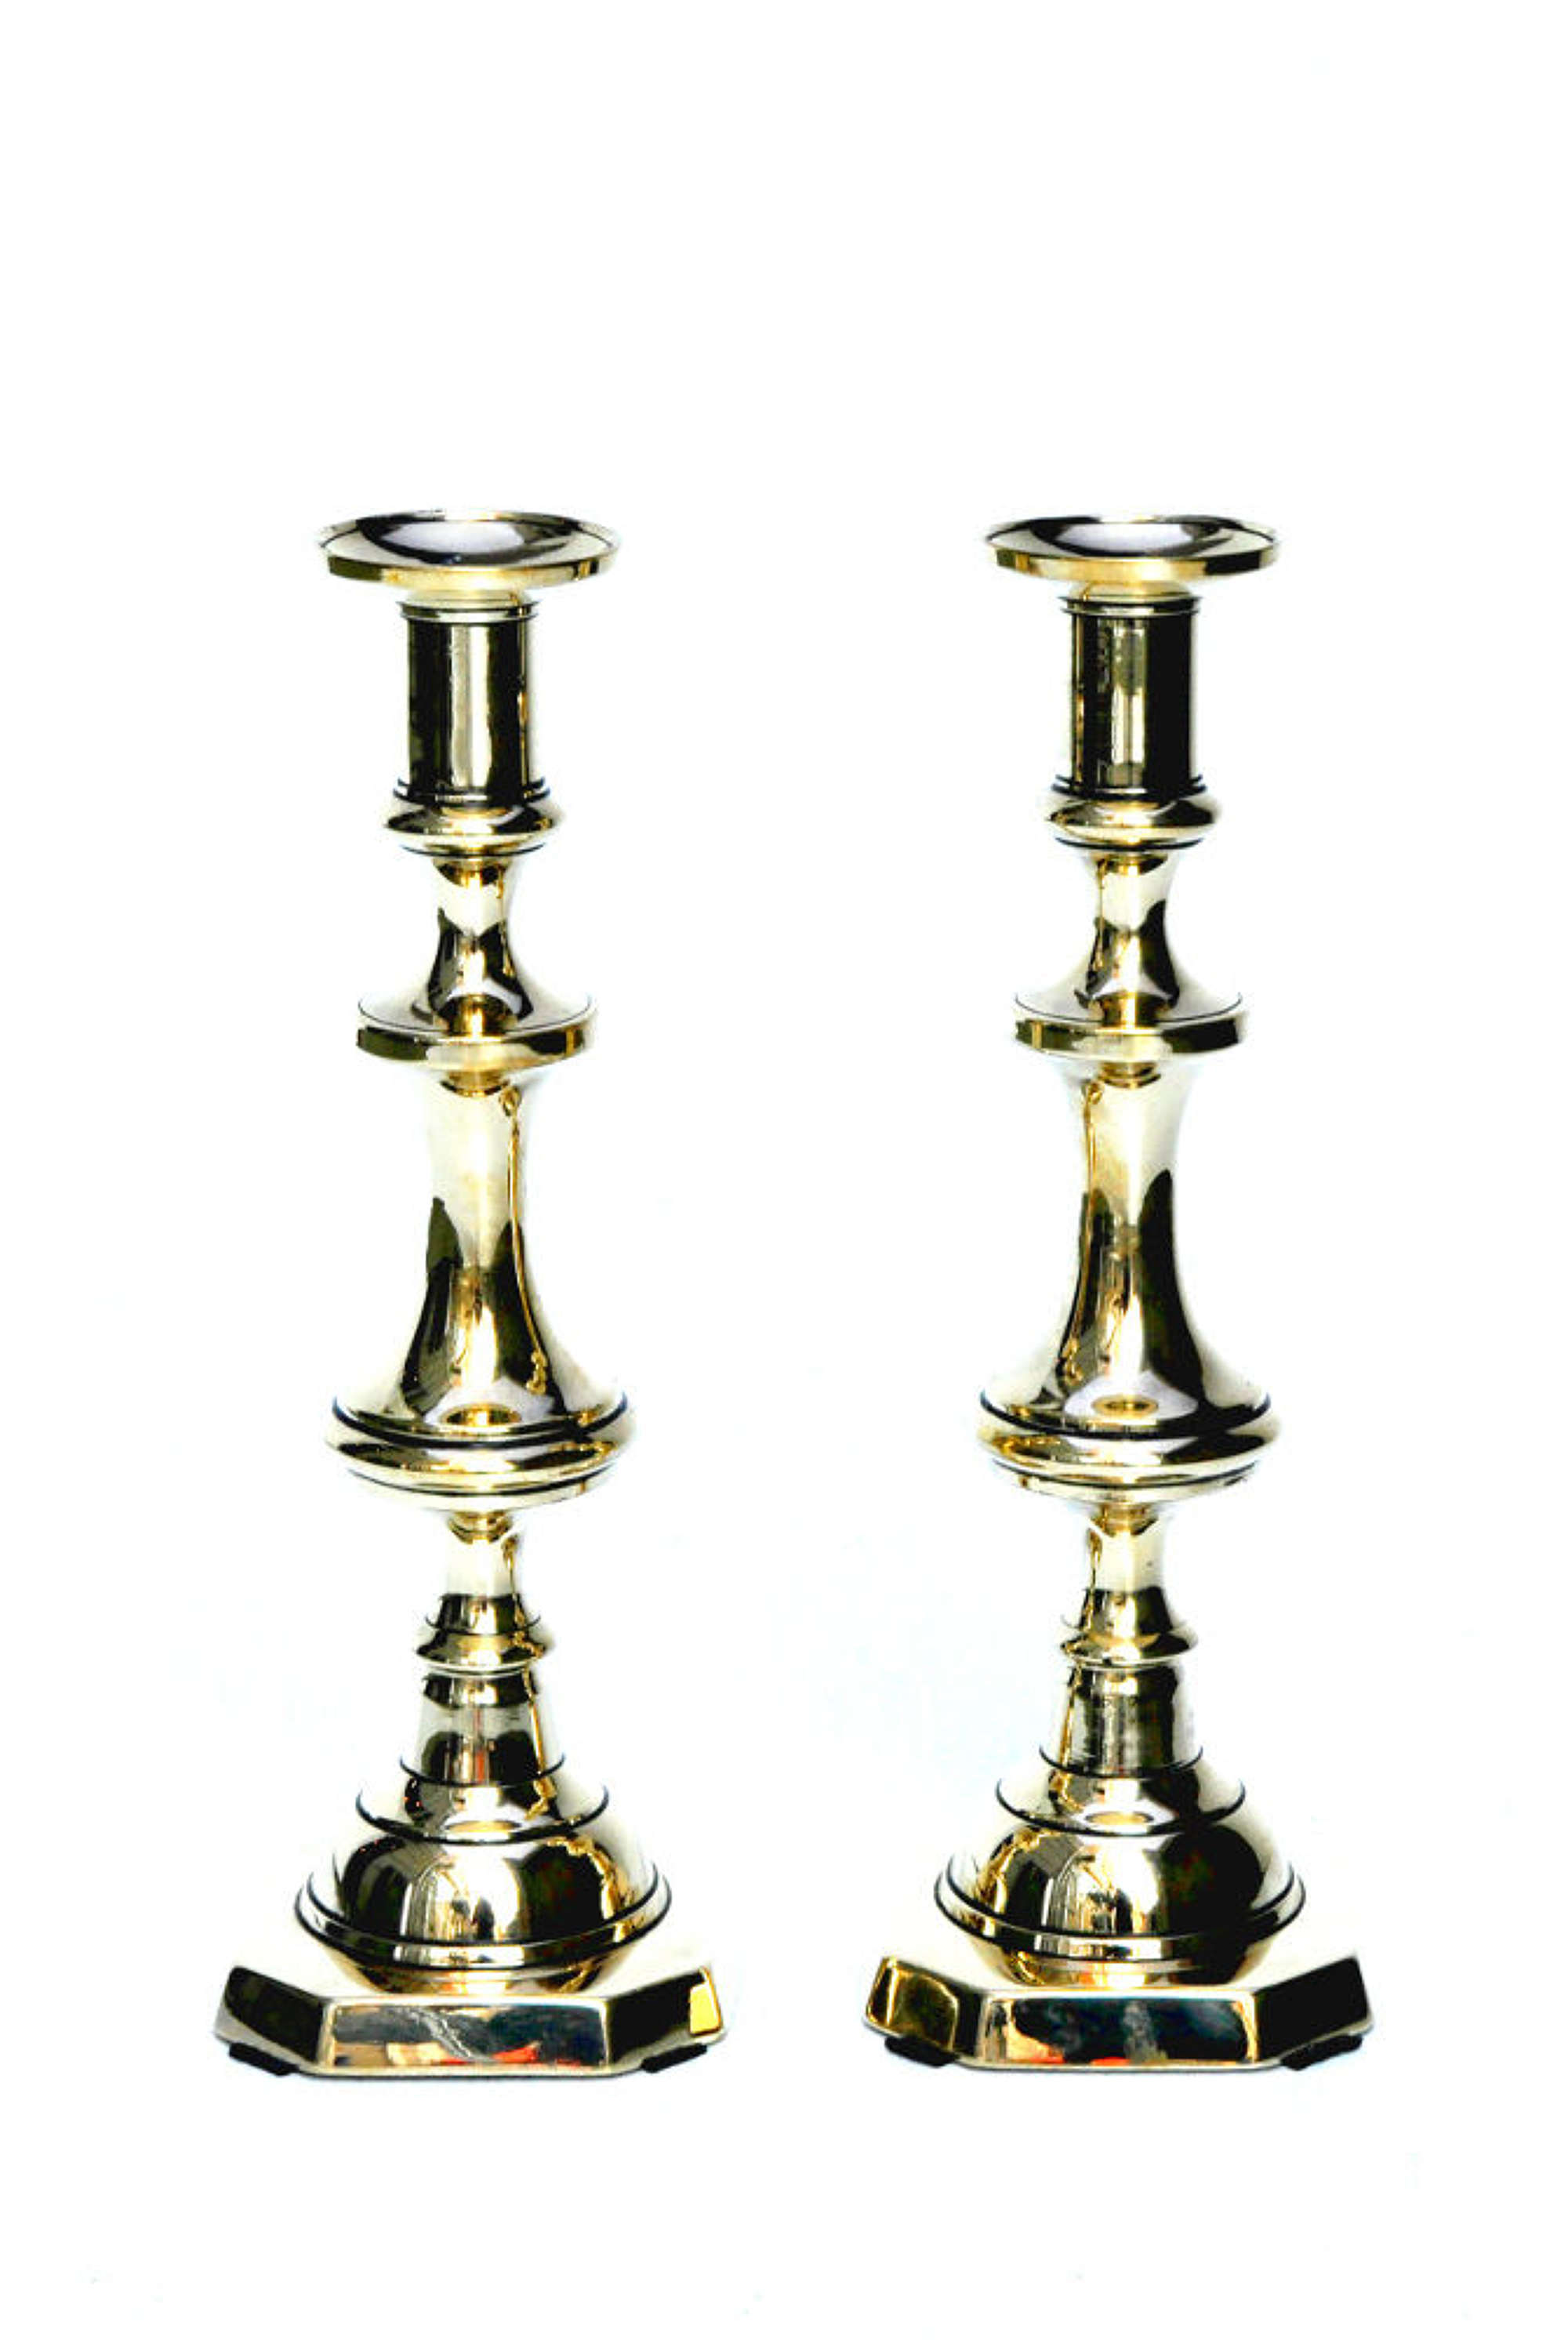 19th Century Victorian Pair Of Lovely Polished Brass Antique Candlesticks